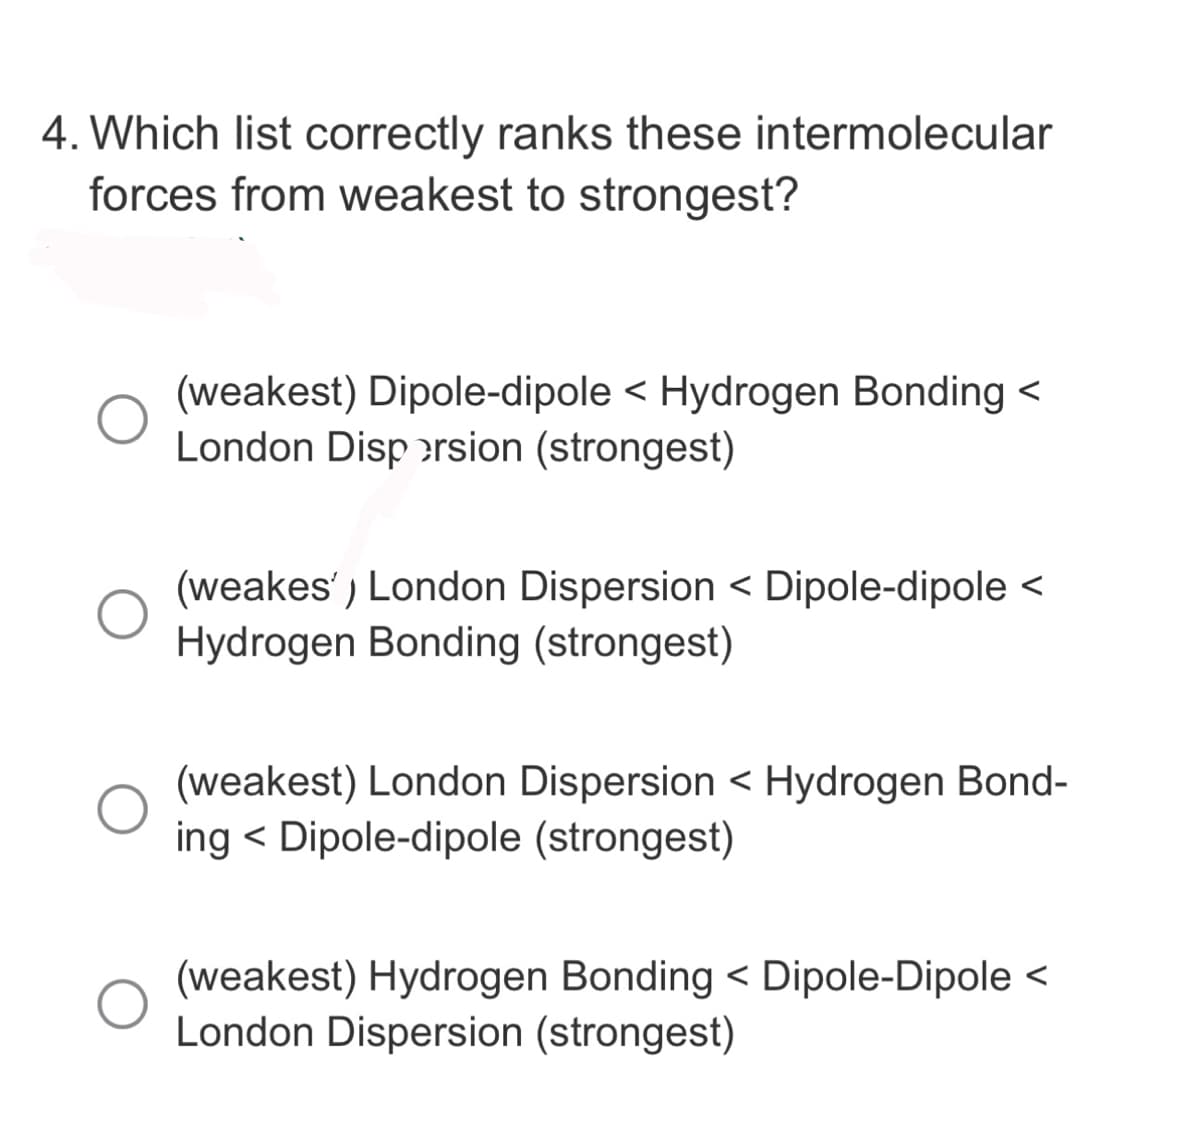 4. Which list correctly ranks these intermolecular
forces from weakest to strongest?
(weakest) Dipole-dipole < Hydrogen Bonding <
London Dispersion (strongest)
(weakes') London Dispersion < Dipole-dipole <
Hydrogen Bonding (strongest)
(weakest) London Dispersion < Hydrogen Bond-
ing < Dipole-dipole (strongest)
(weakest) Hydrogen Bonding < Dipole-Dipole <
London Dispersion (strongest)